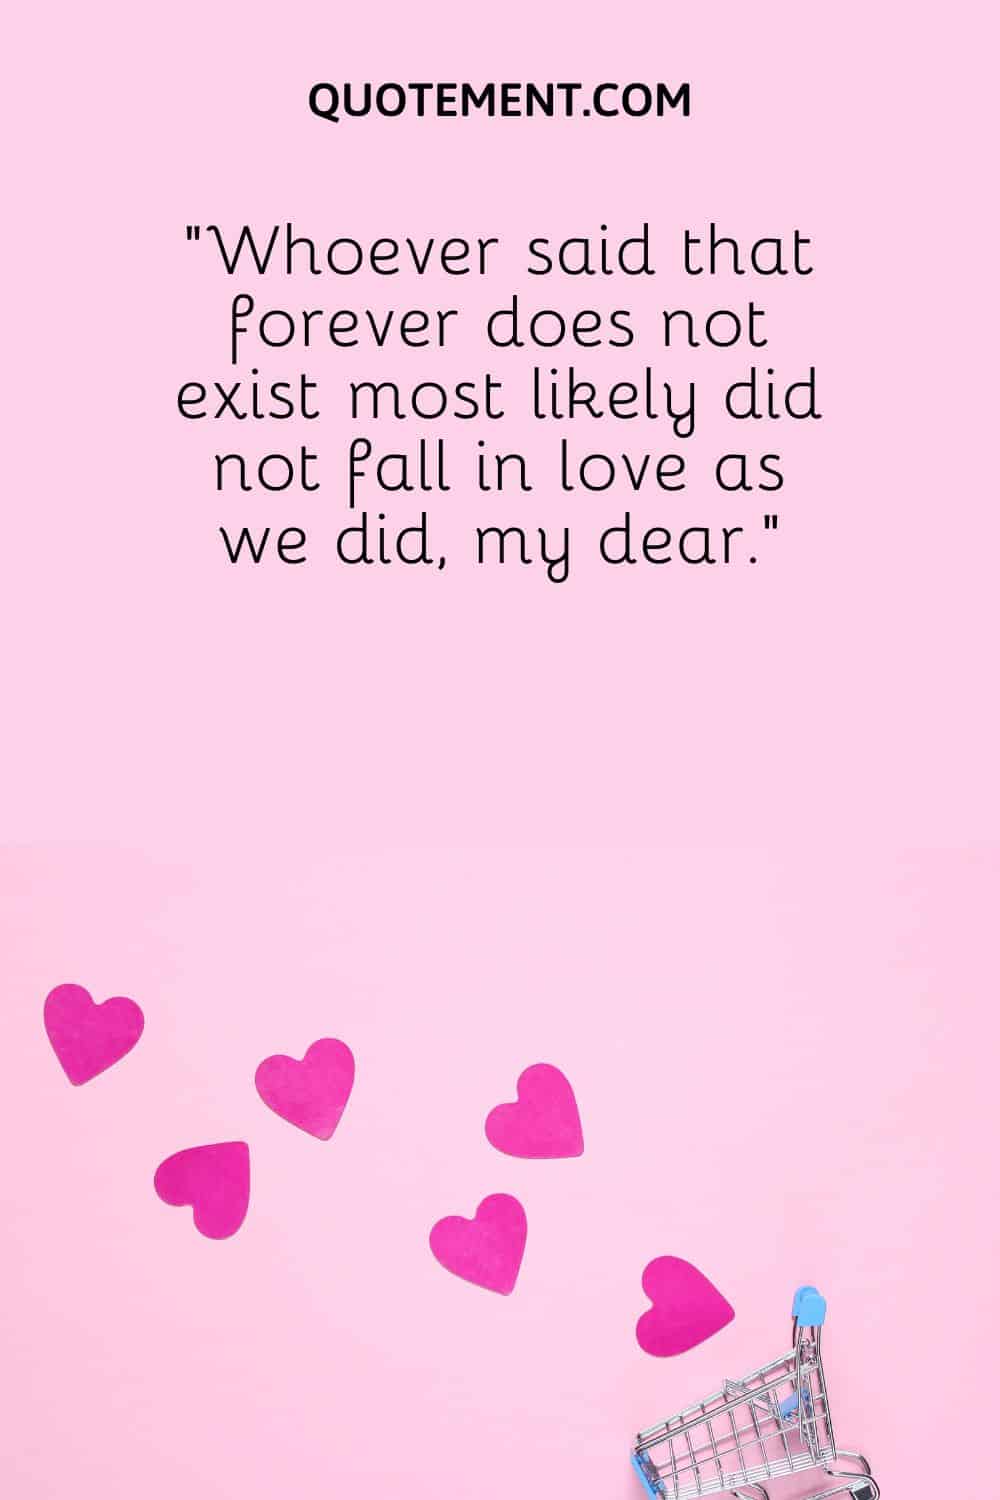 “Whoever said that forever does not exist most likely did not fall in love as we did, my dear.”